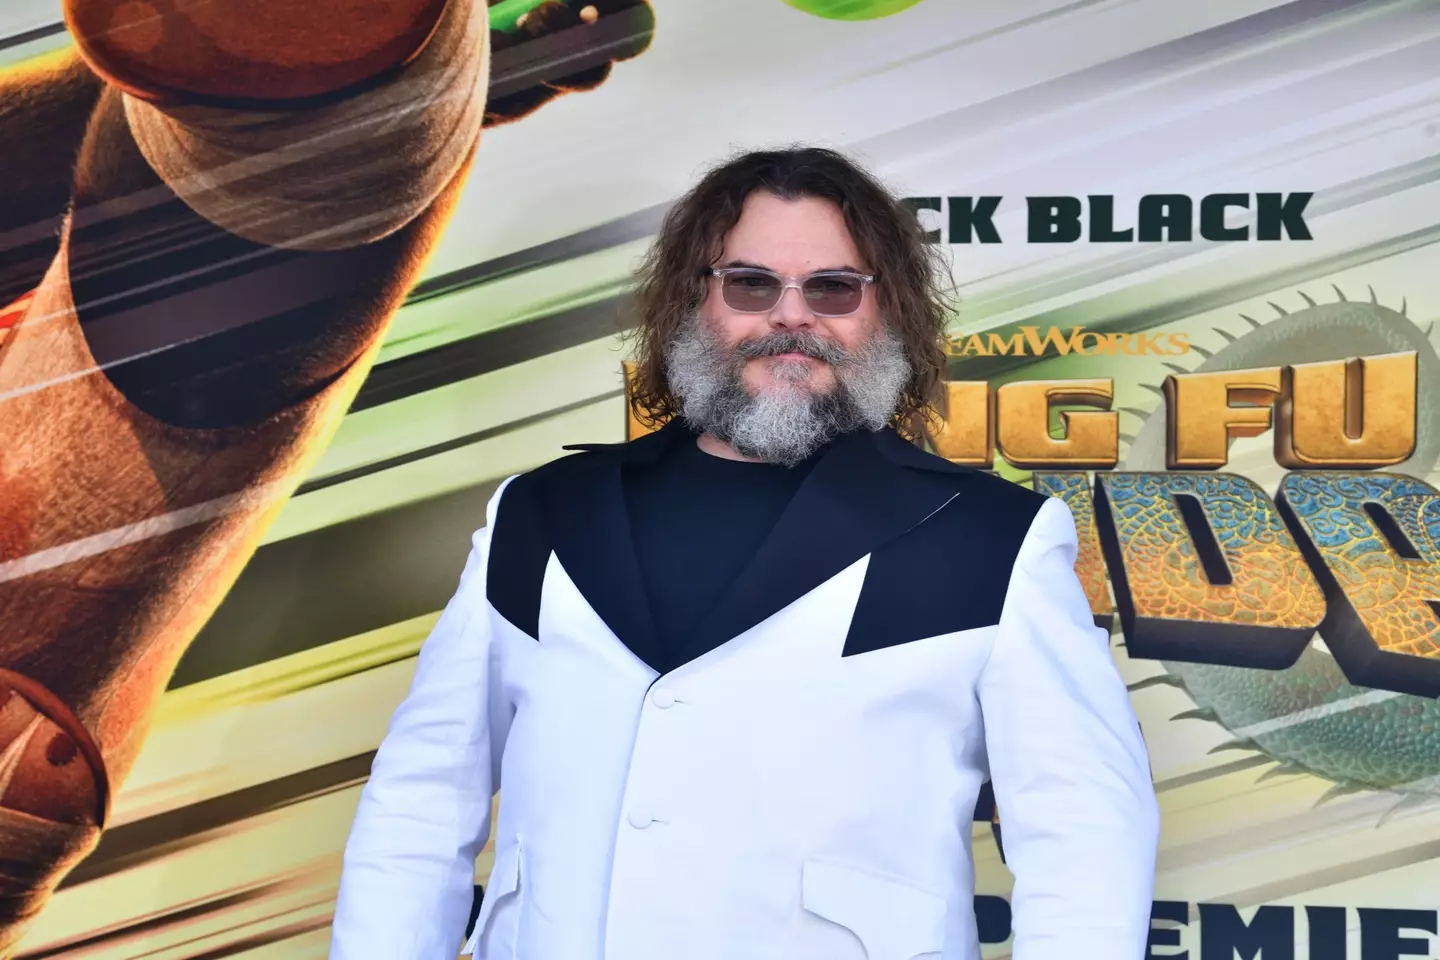 Black has reprised the role of Po several times, including for Kung Fu Panda 4.